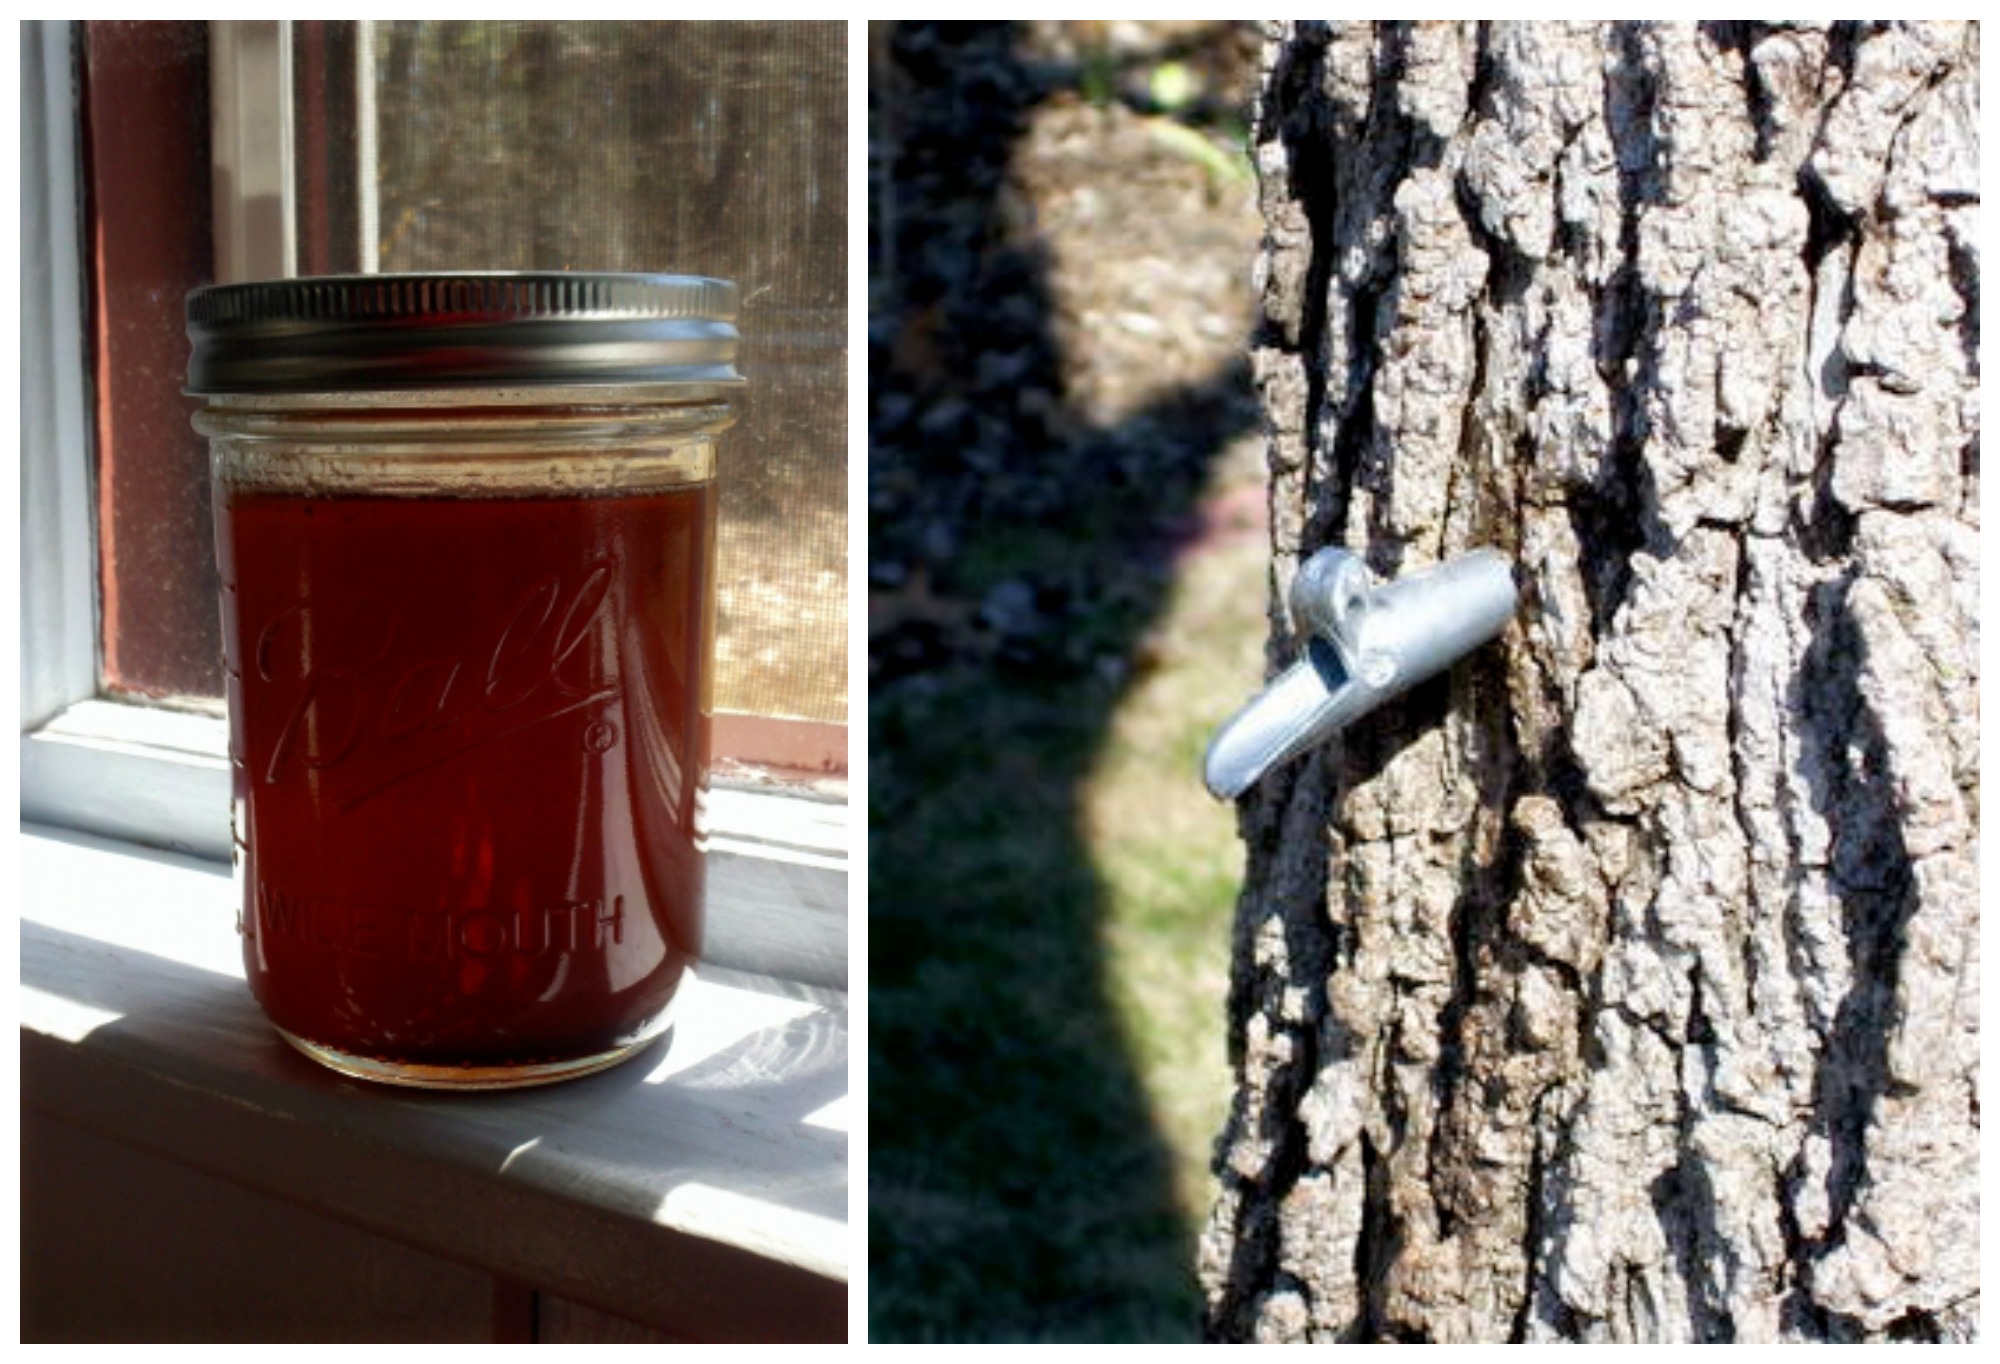 Can you make syrup from fruit trees